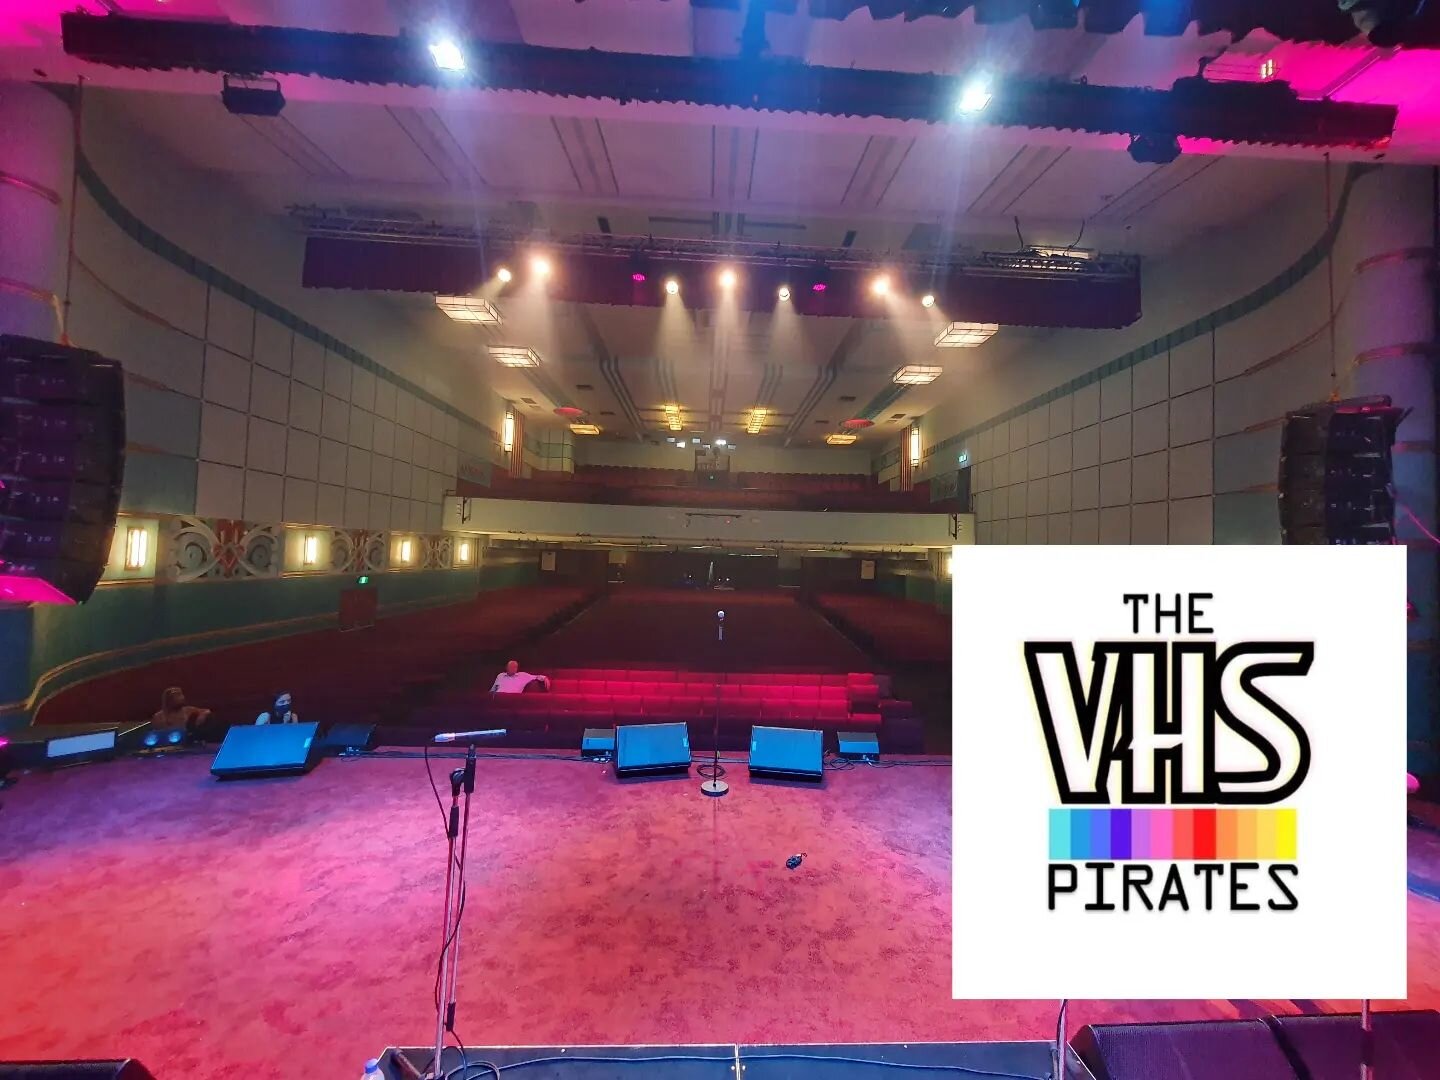 Looking forward to performing again at the historic @astortheatre with @the_vhs_pirates 3rd March! #perthisok #perthlife #livemusic @mix945perth @nova937 @triplemperth